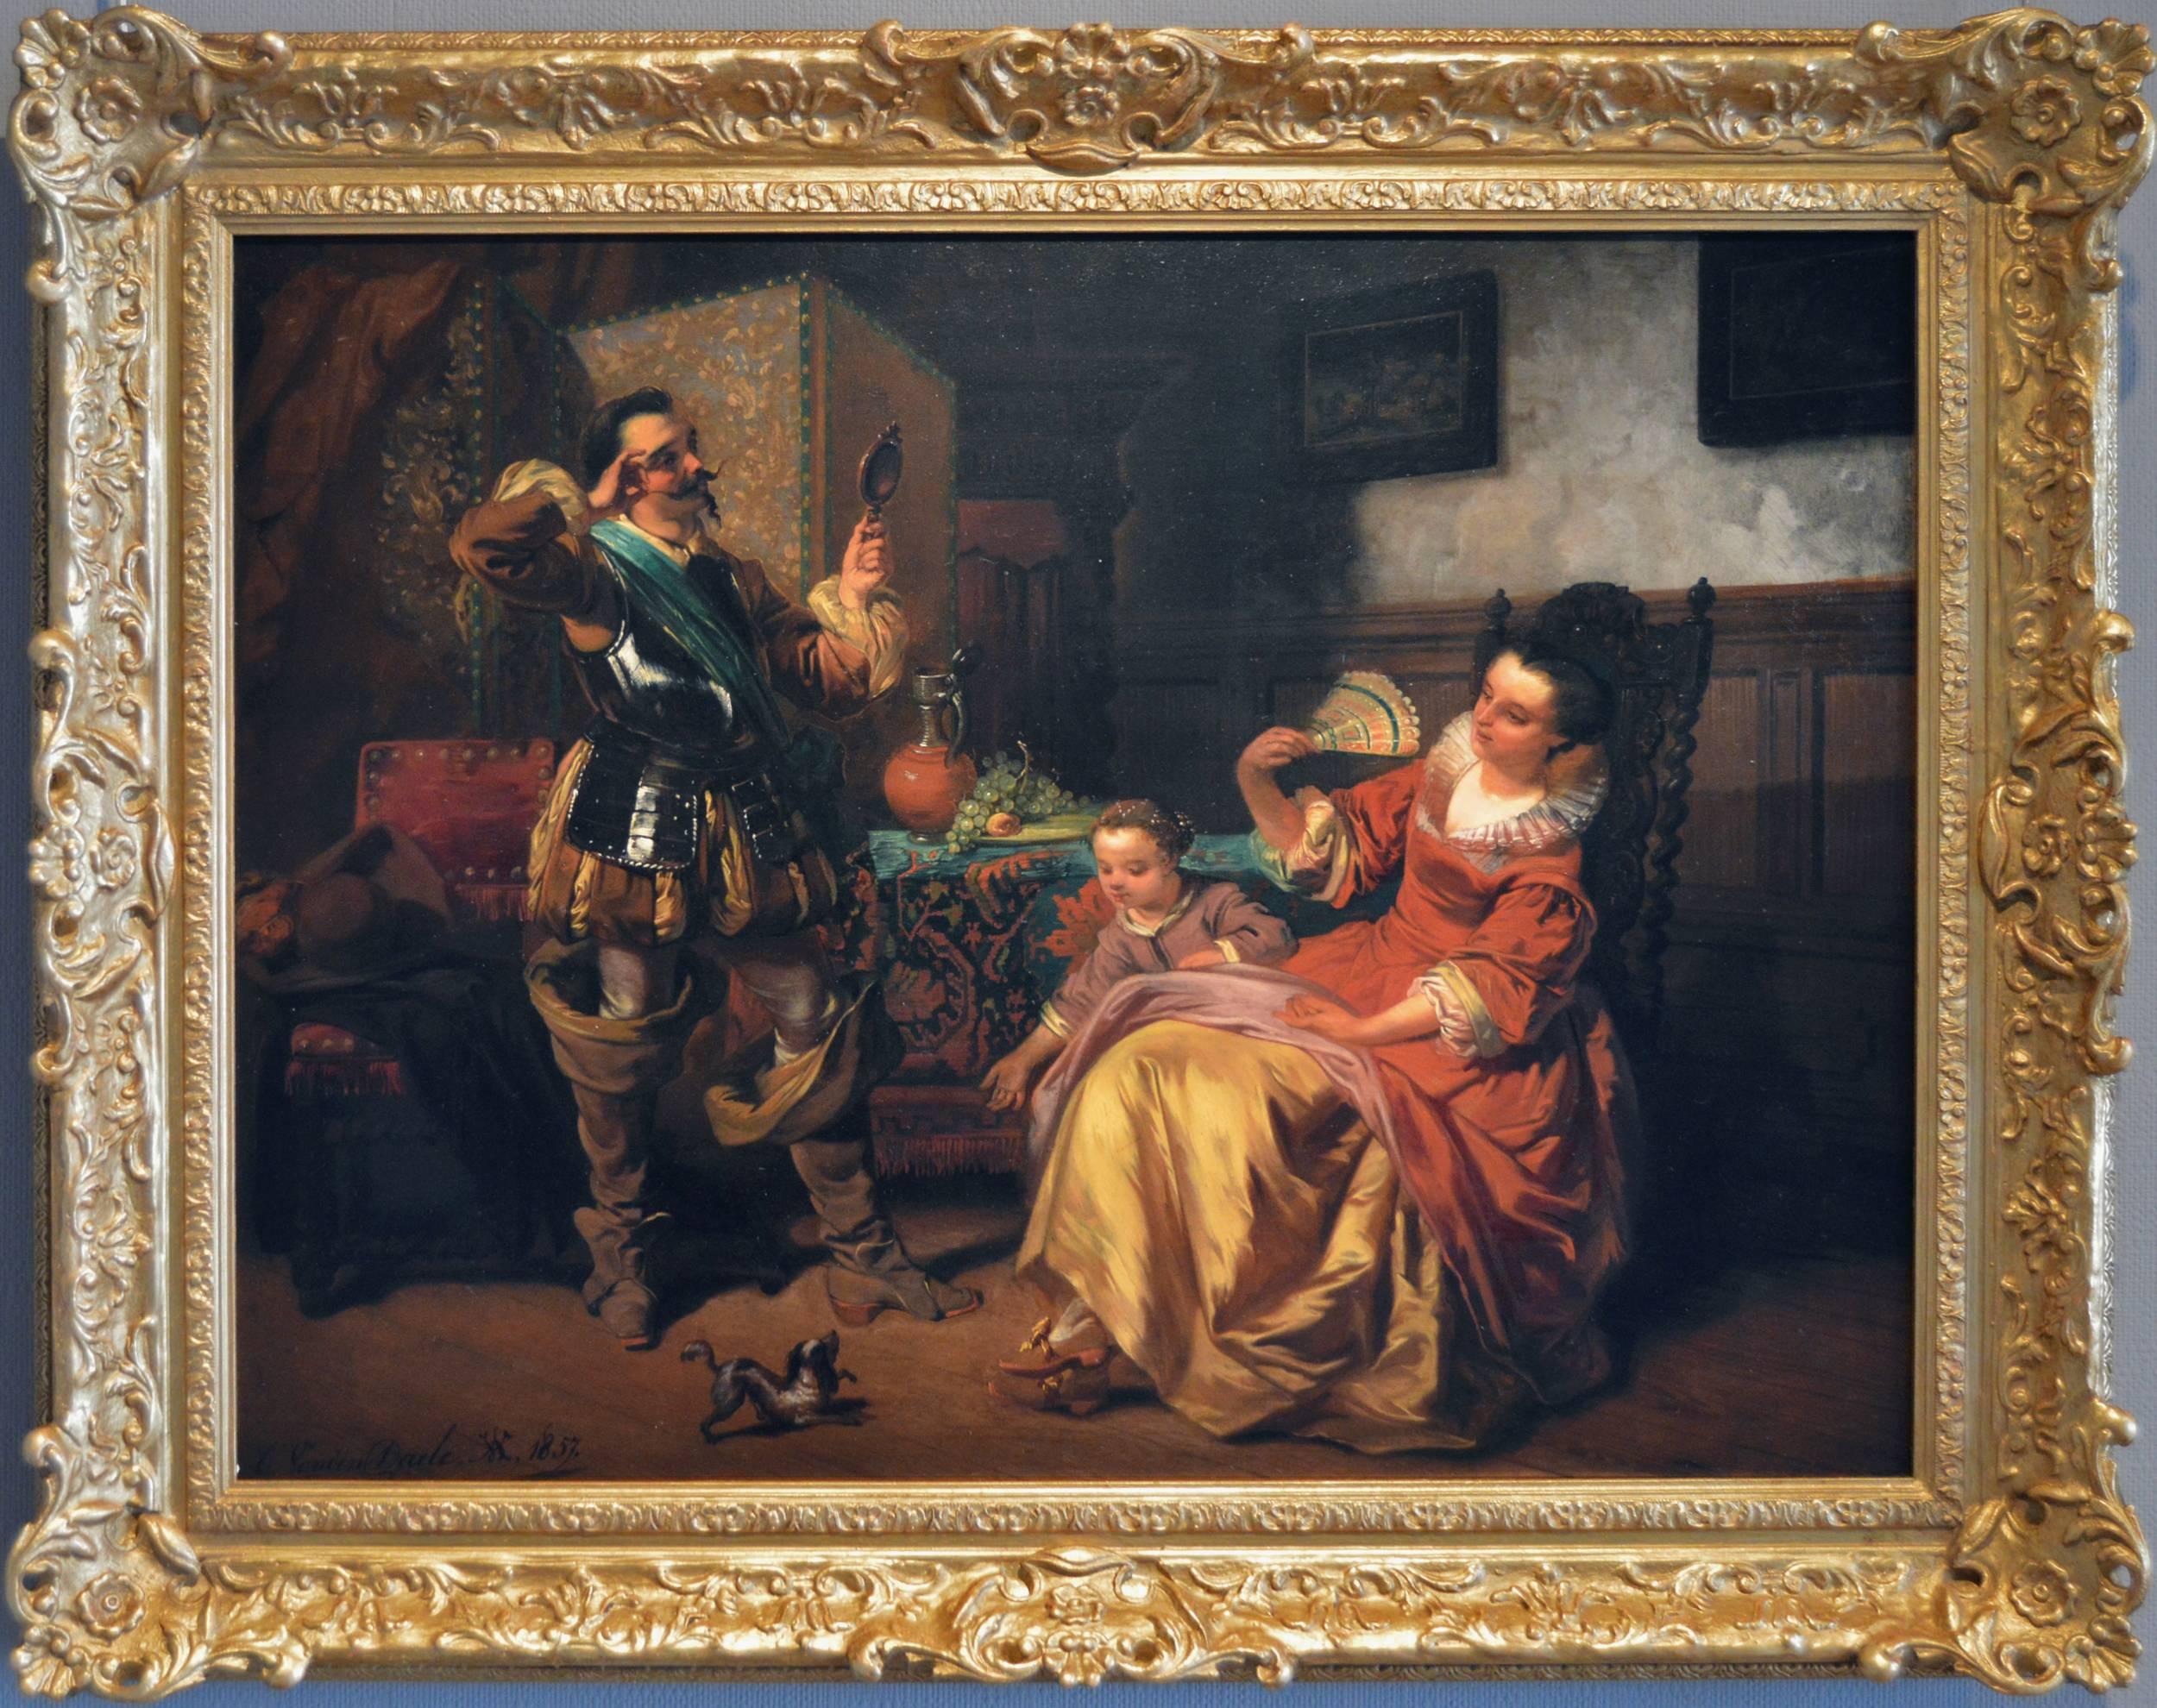 19th Century historical genre oil painting of a cavalier